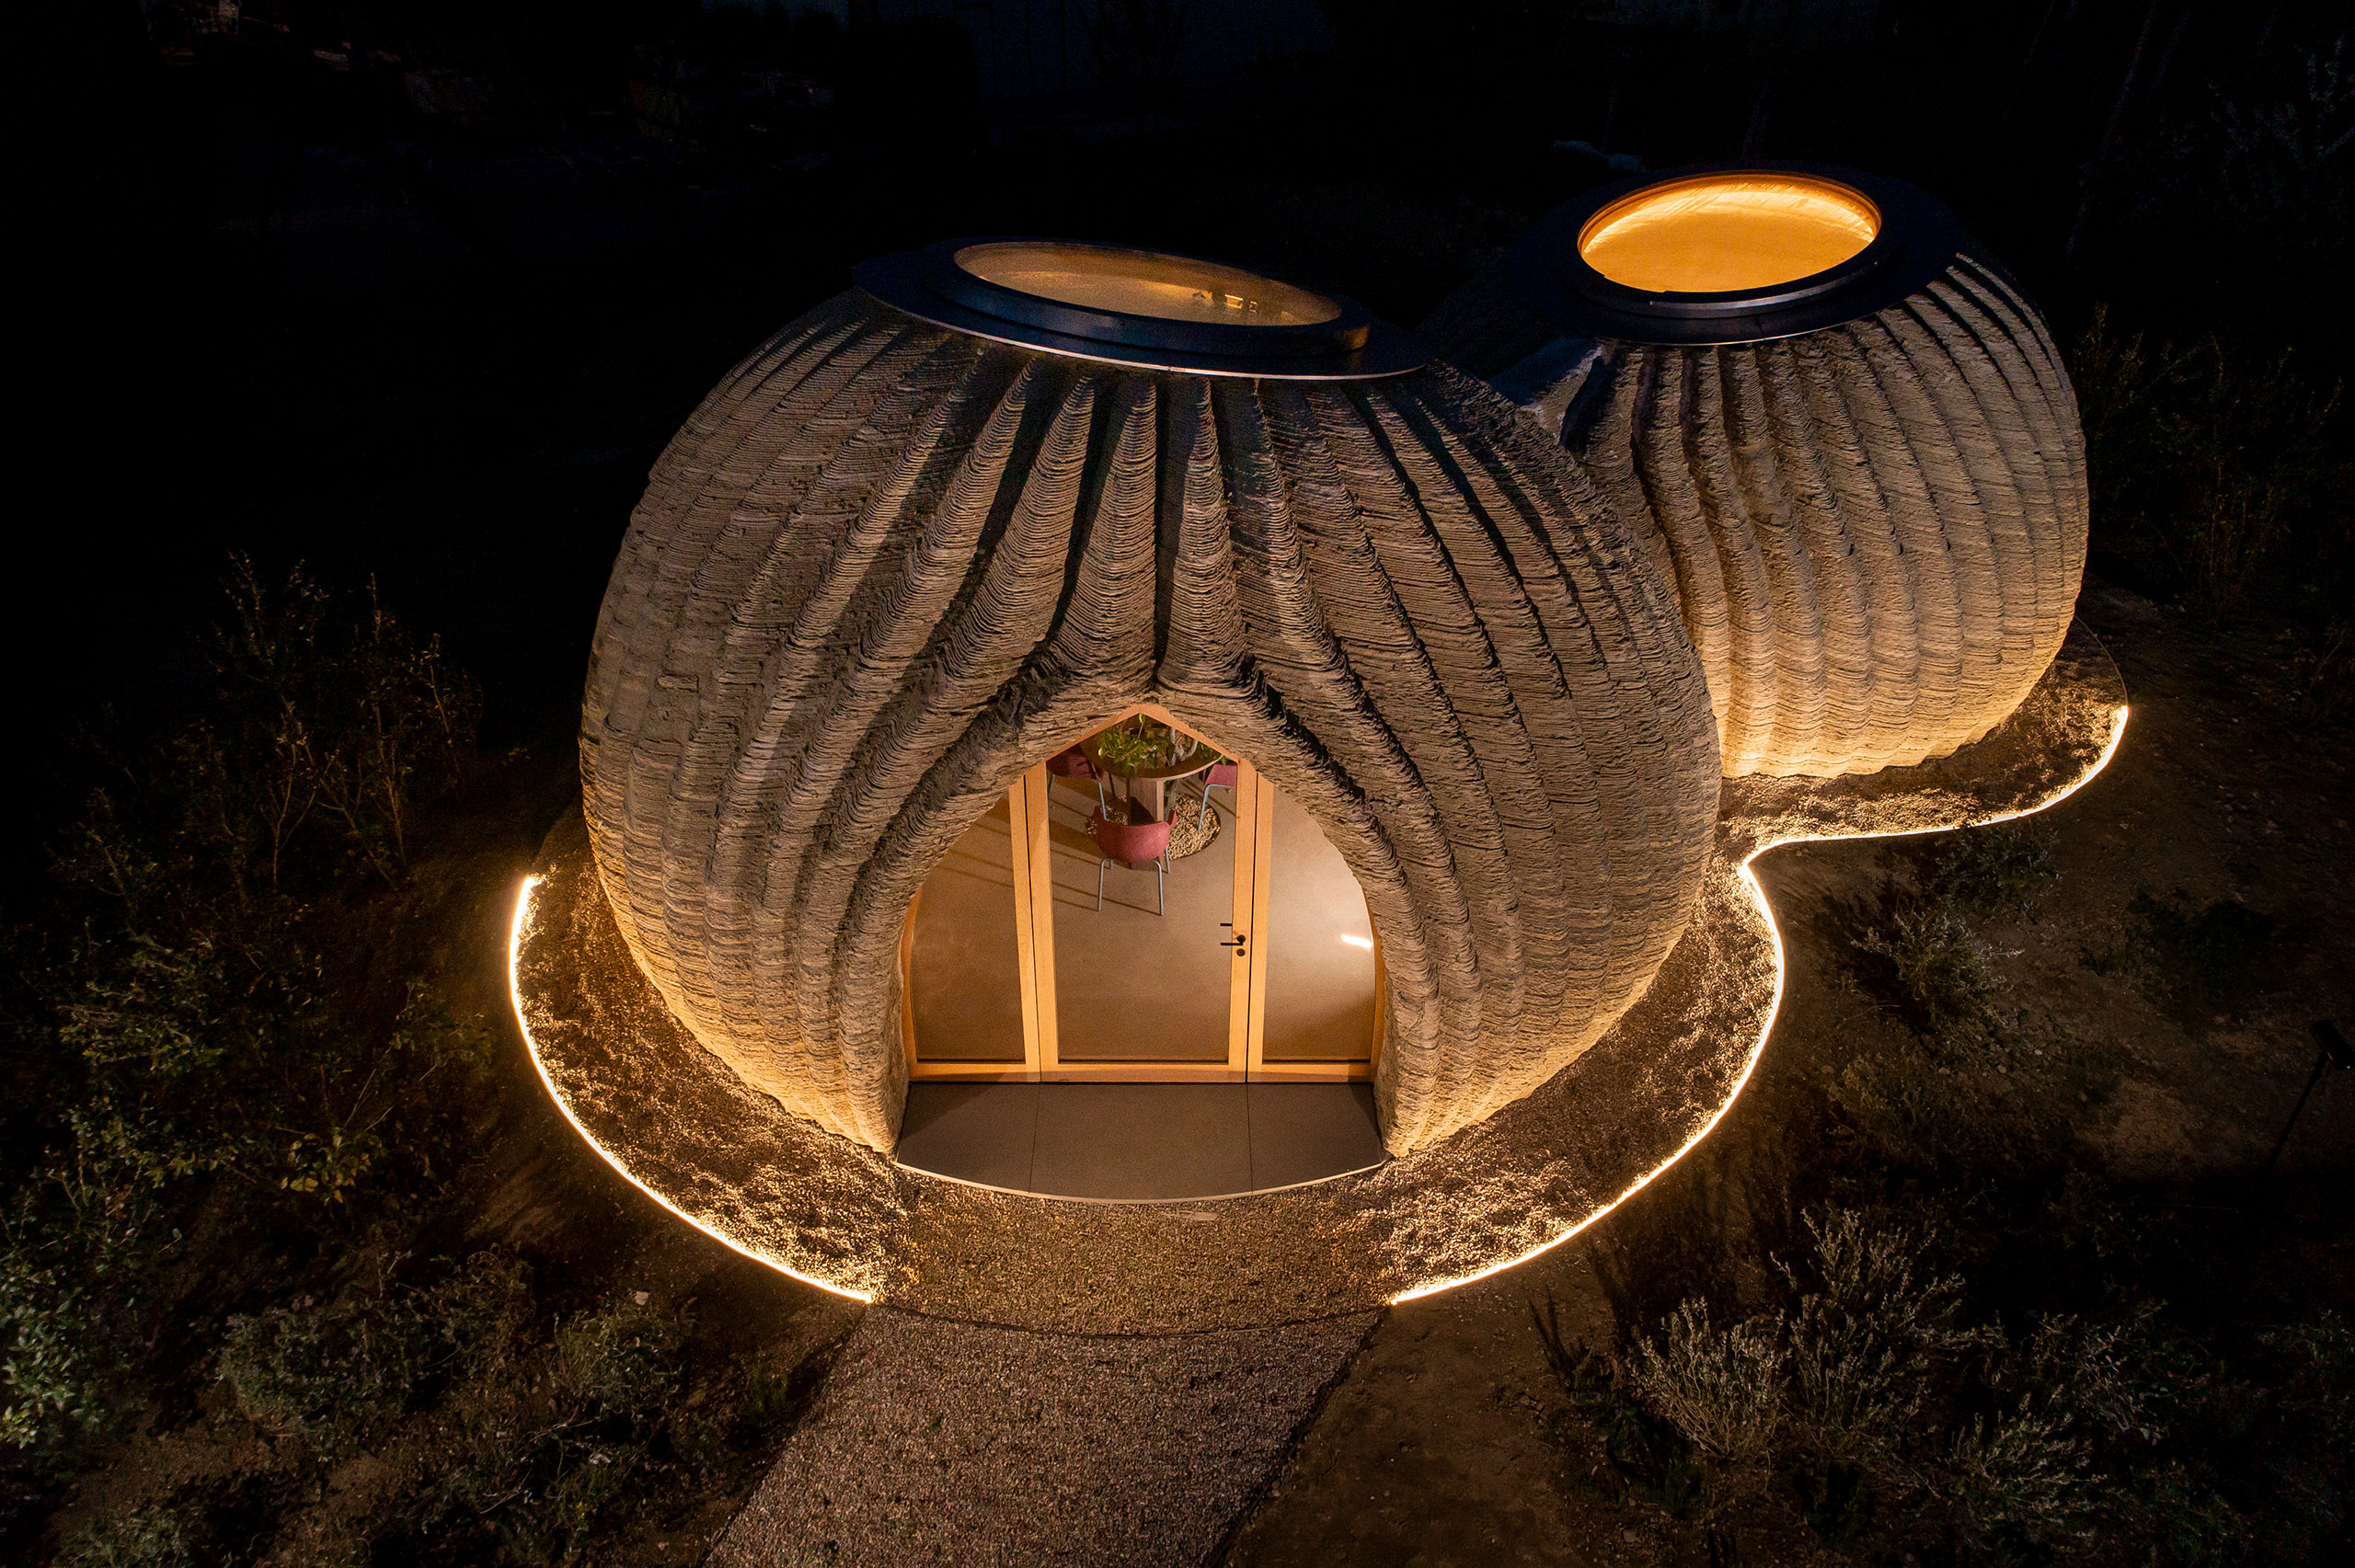 TECLA, 3D Printed Habitat by WASP and Mario Cucinella Architects. Photo by Iago Corazza.